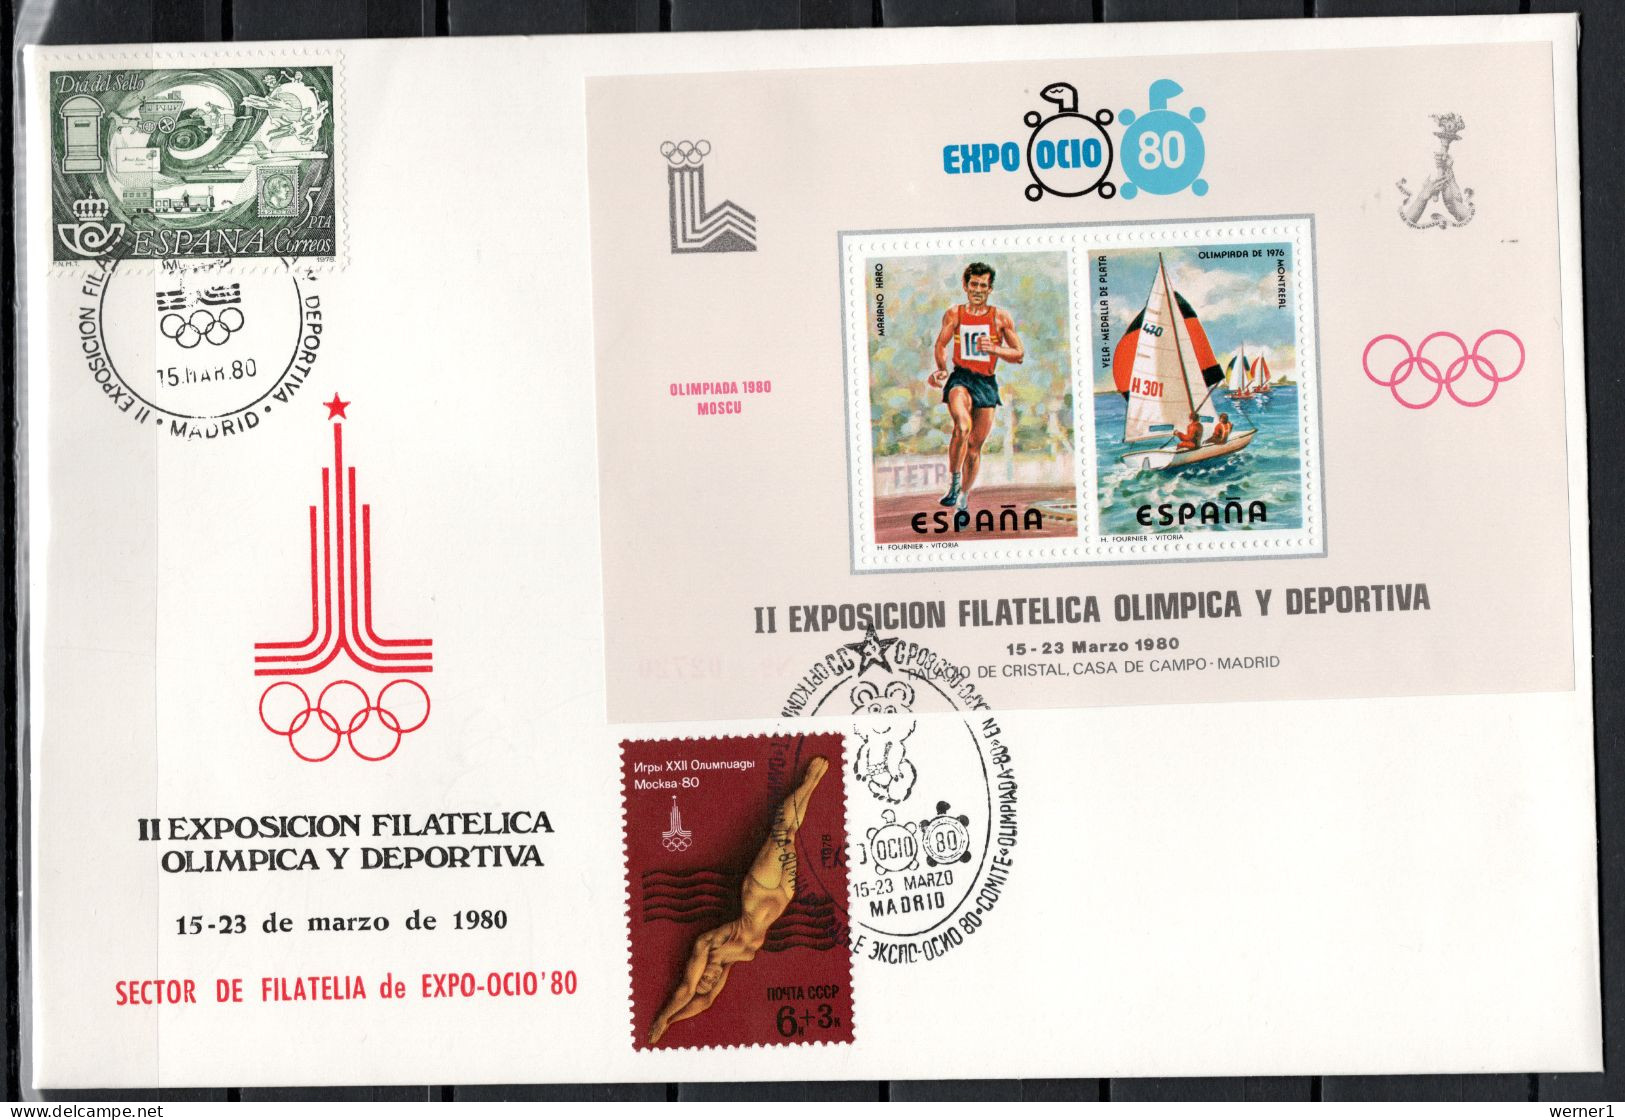 Spain 1980 Olympic Games Moscow / Lake Placid Commemorative Cover With Vignette MNH -scarce- - Verano 1980: Moscu